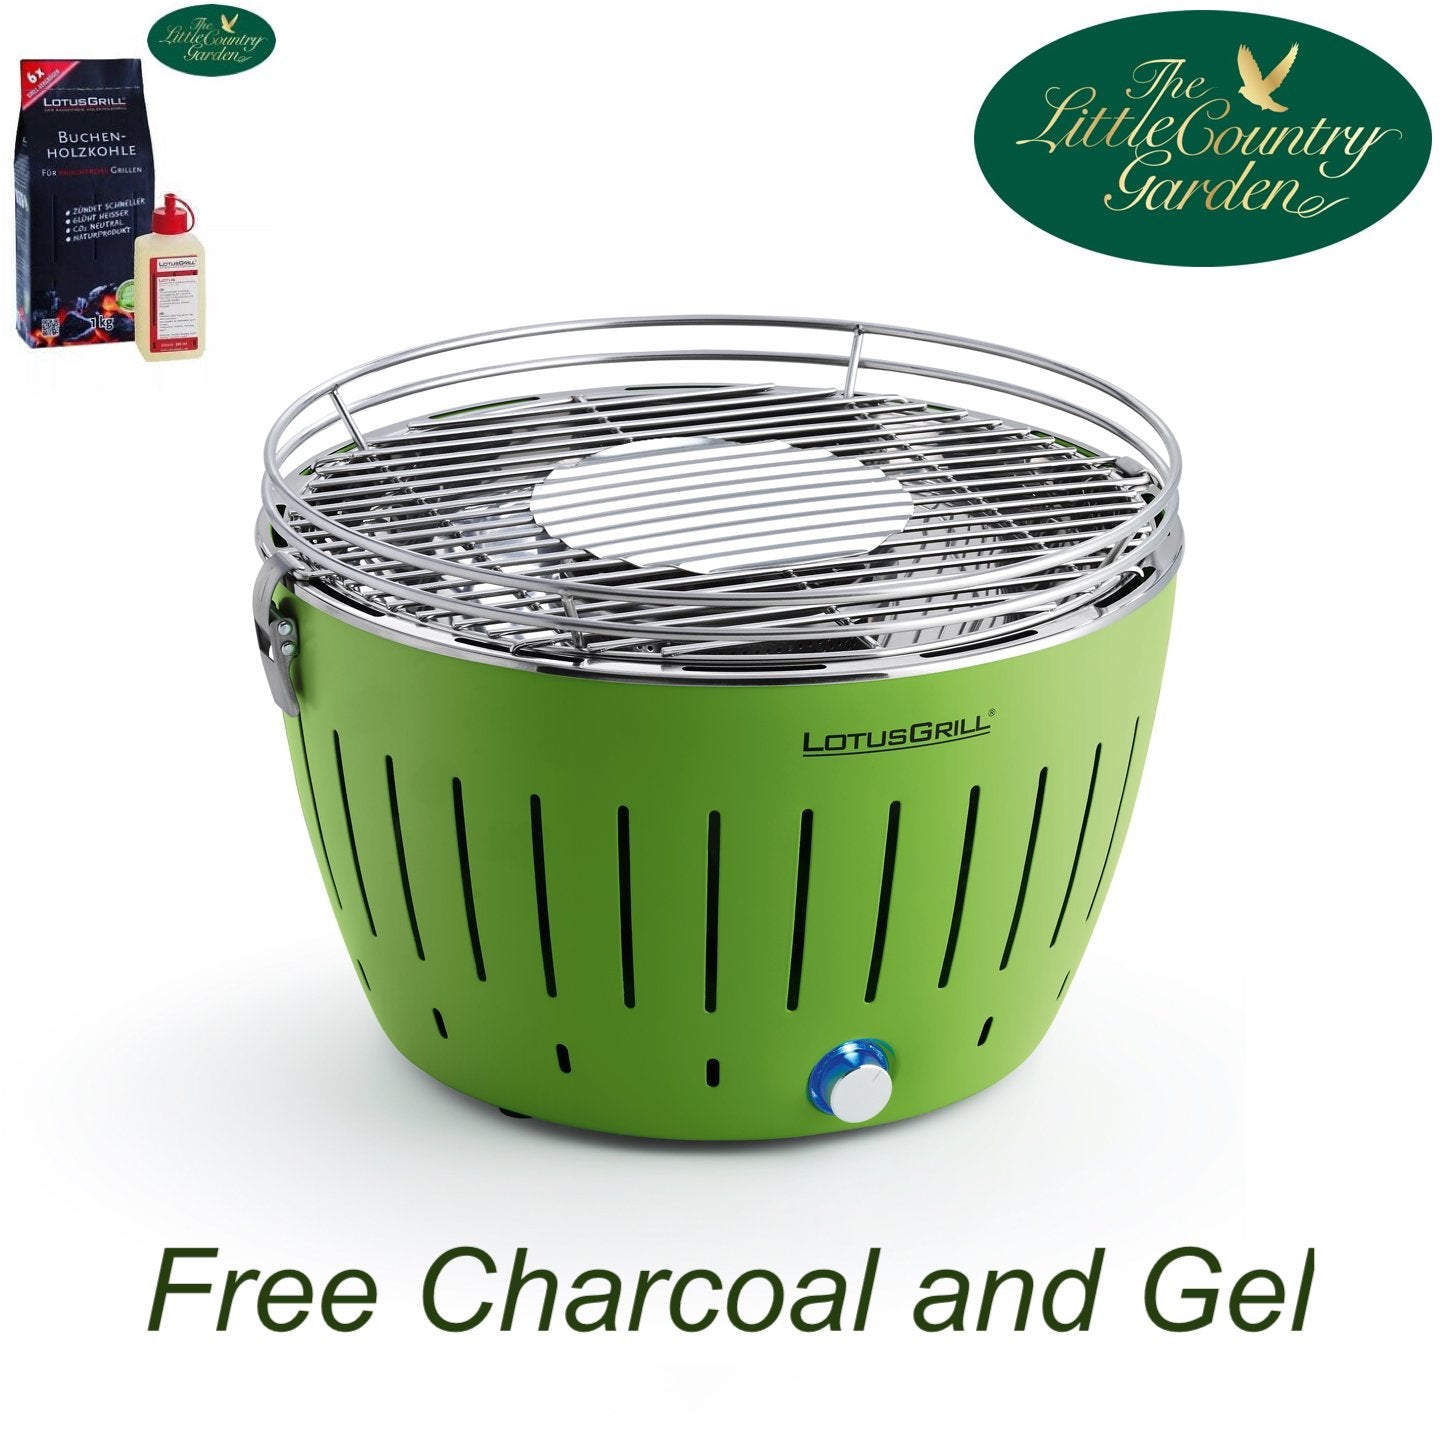 Lotus Grill Standard Size Smokeless LotusGrill Green Free Charcoal and Lighting Gel